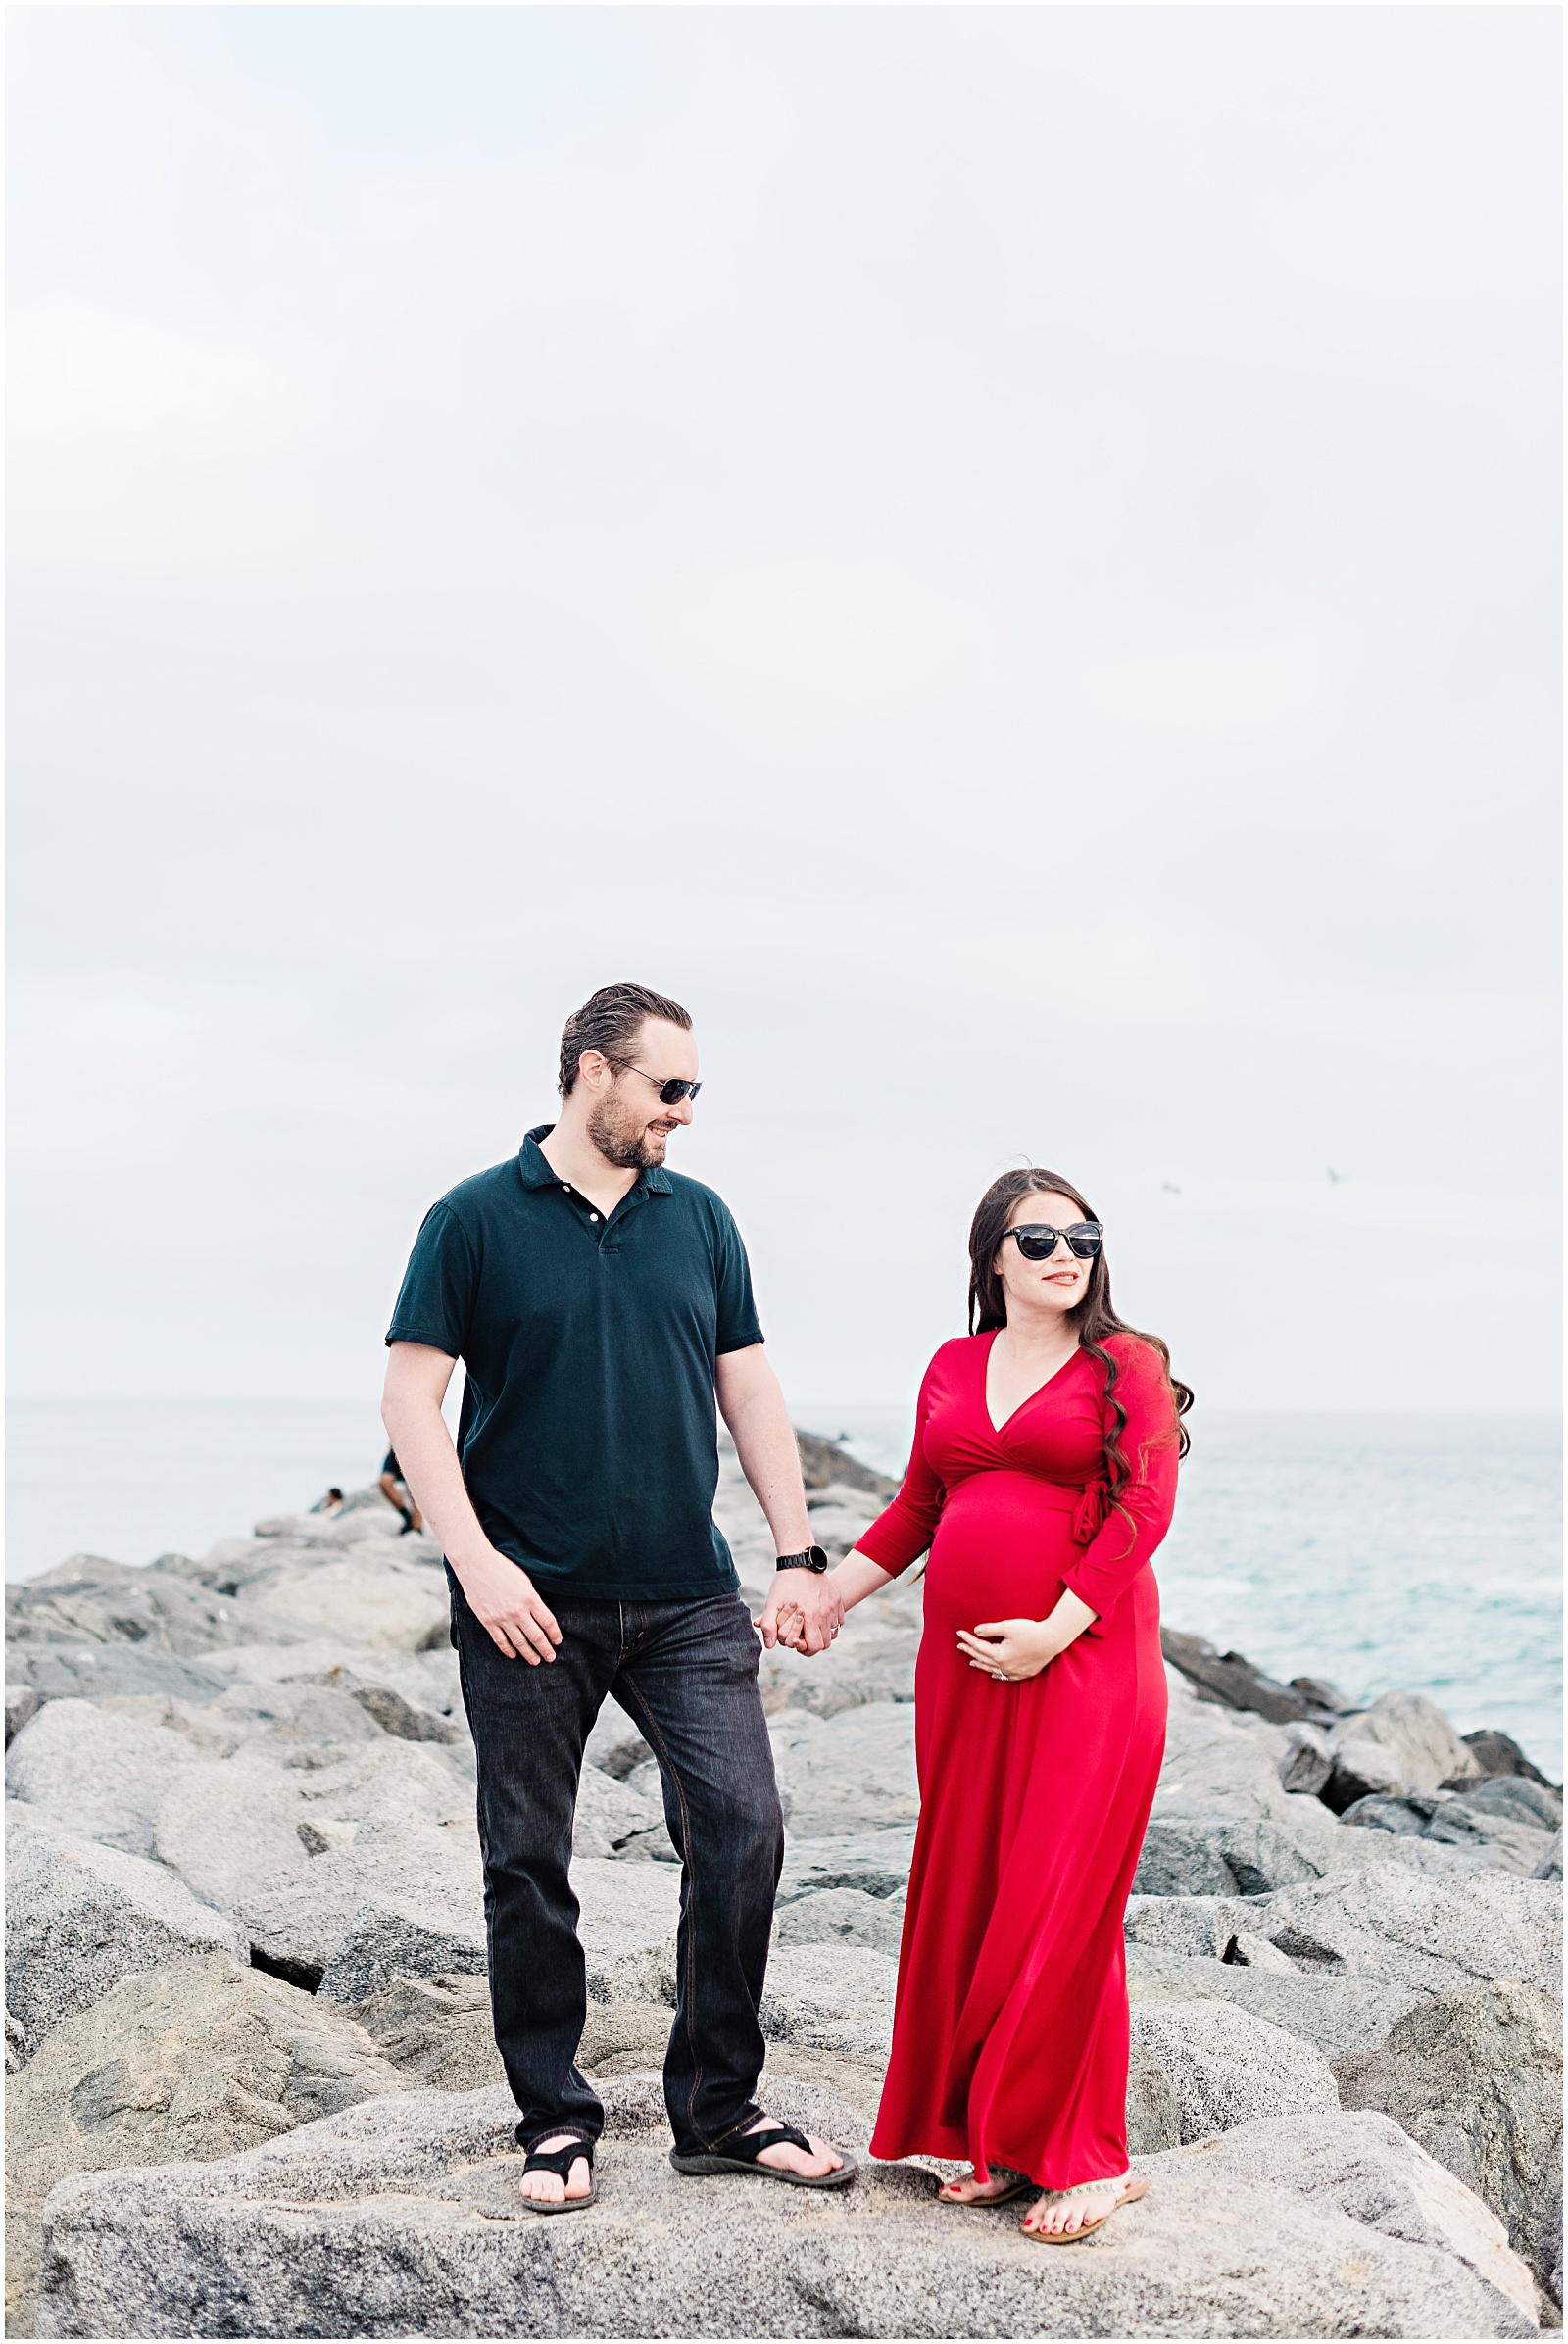 Newport Beach Maternity session. Photographed by Mollie Jane Photography.  To see more, go to www.molliejanephotography.com